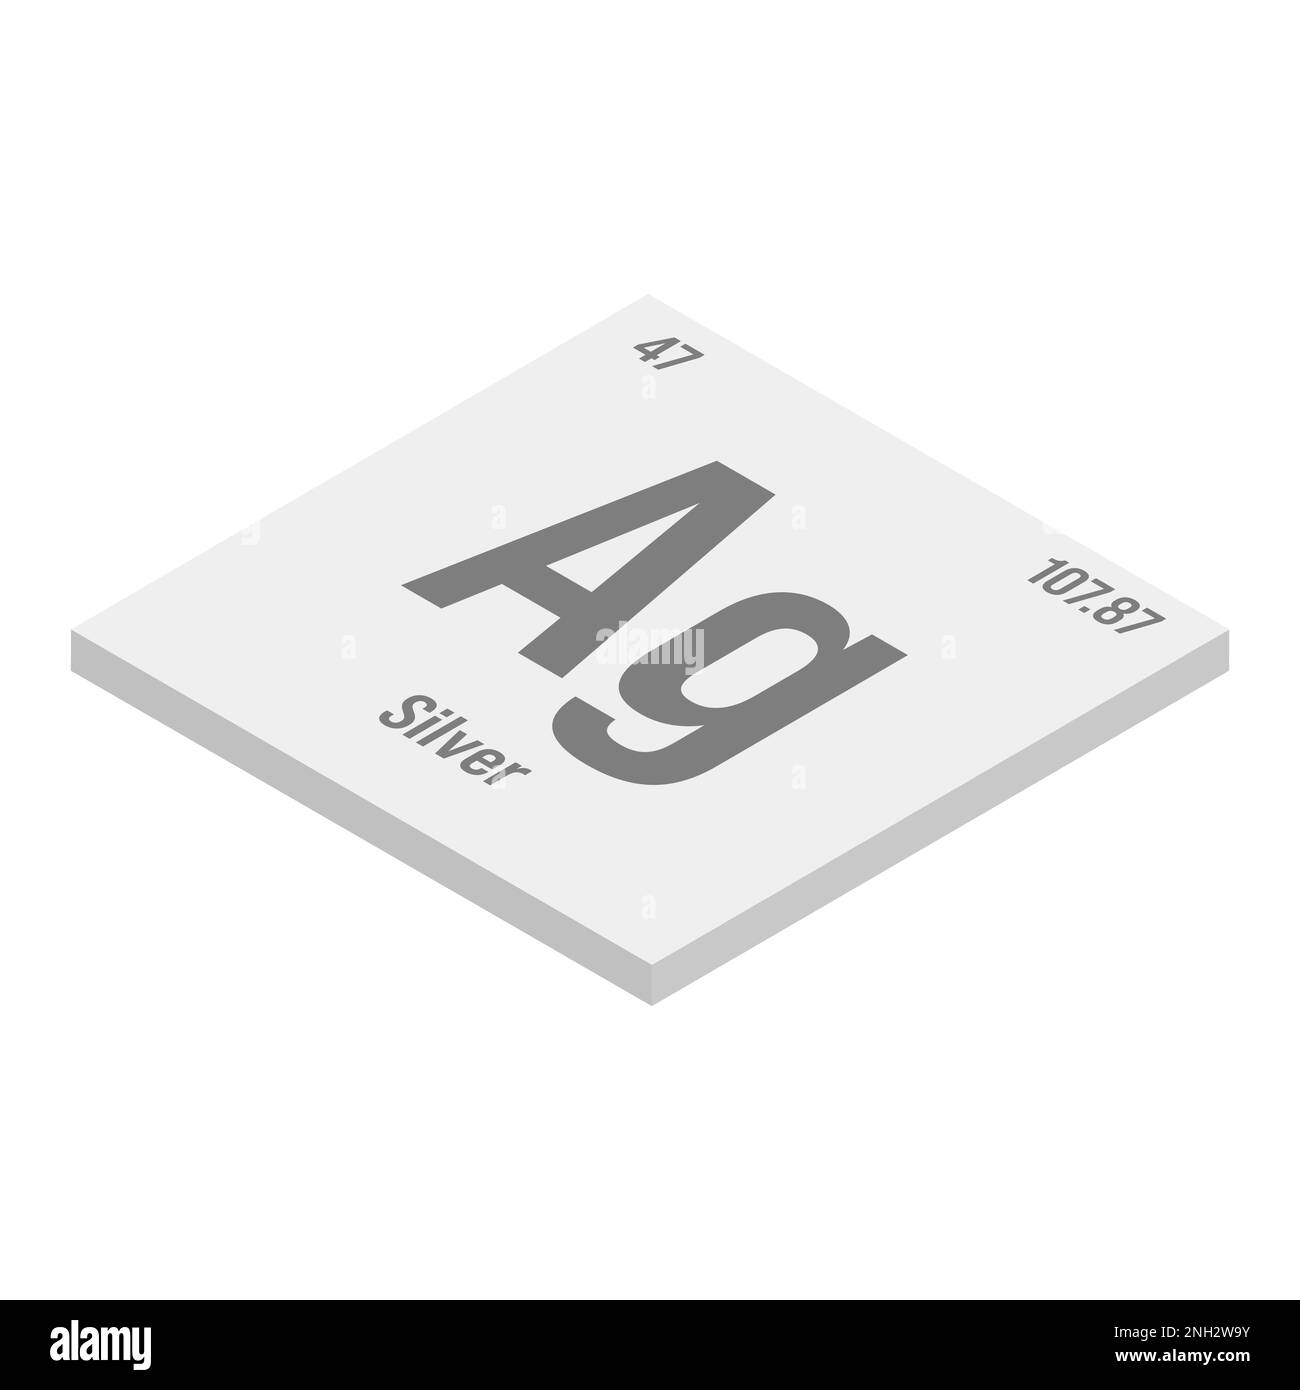 Silver, Ag, gray 3D isometric illustration of periodic table element with name, symbol, atomic number and weight. Transition metal with various industrial uses, such as in jewelry, coins, and as a component in certain types of medical devices. Stock Vector